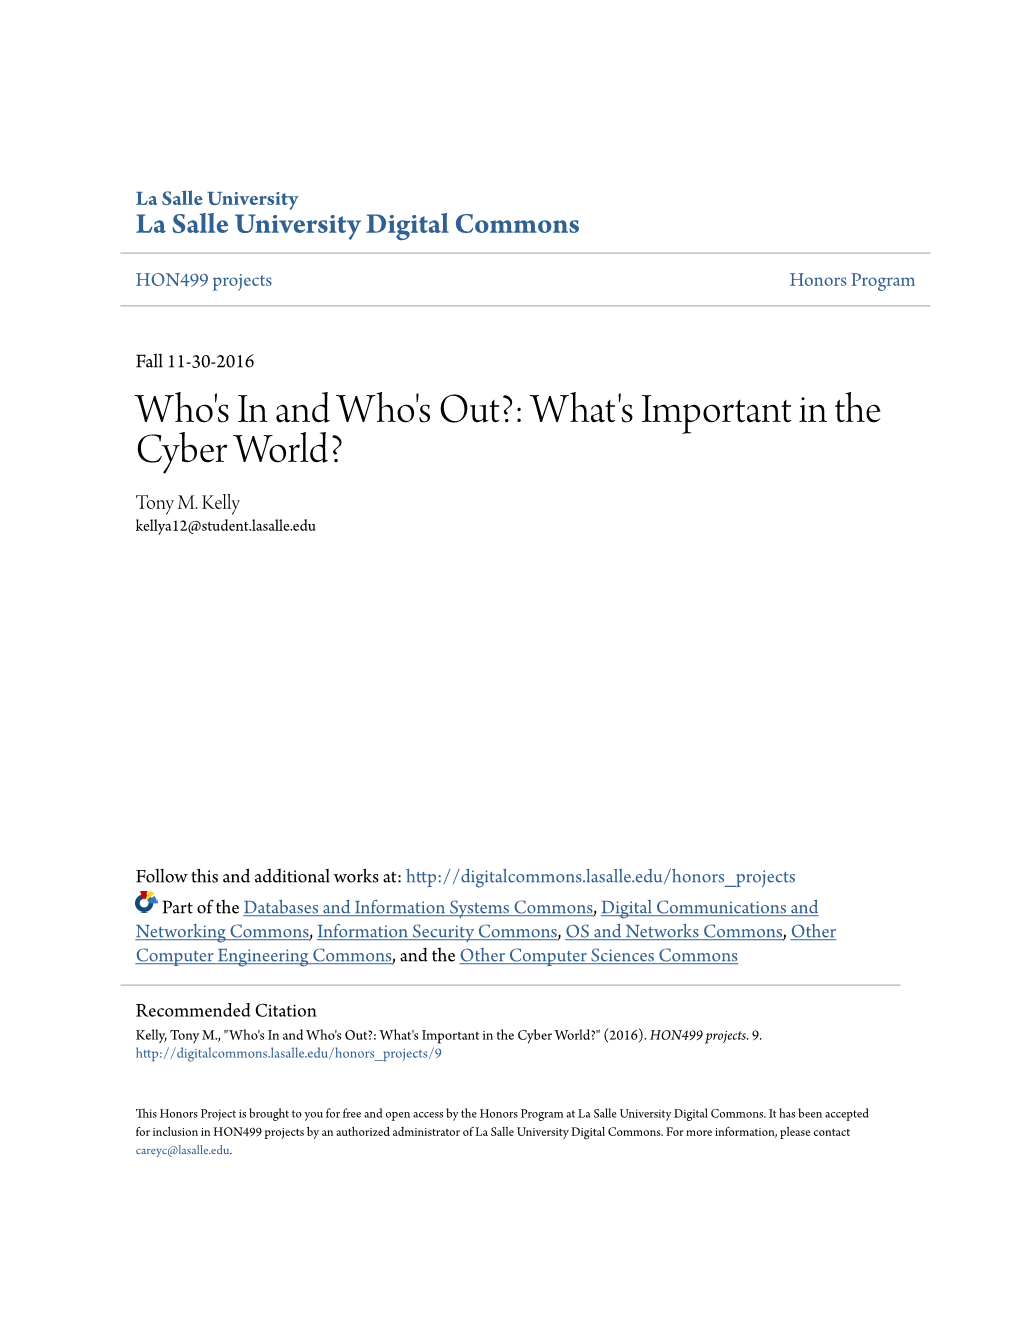 What's Important in the Cyber World? Tony M